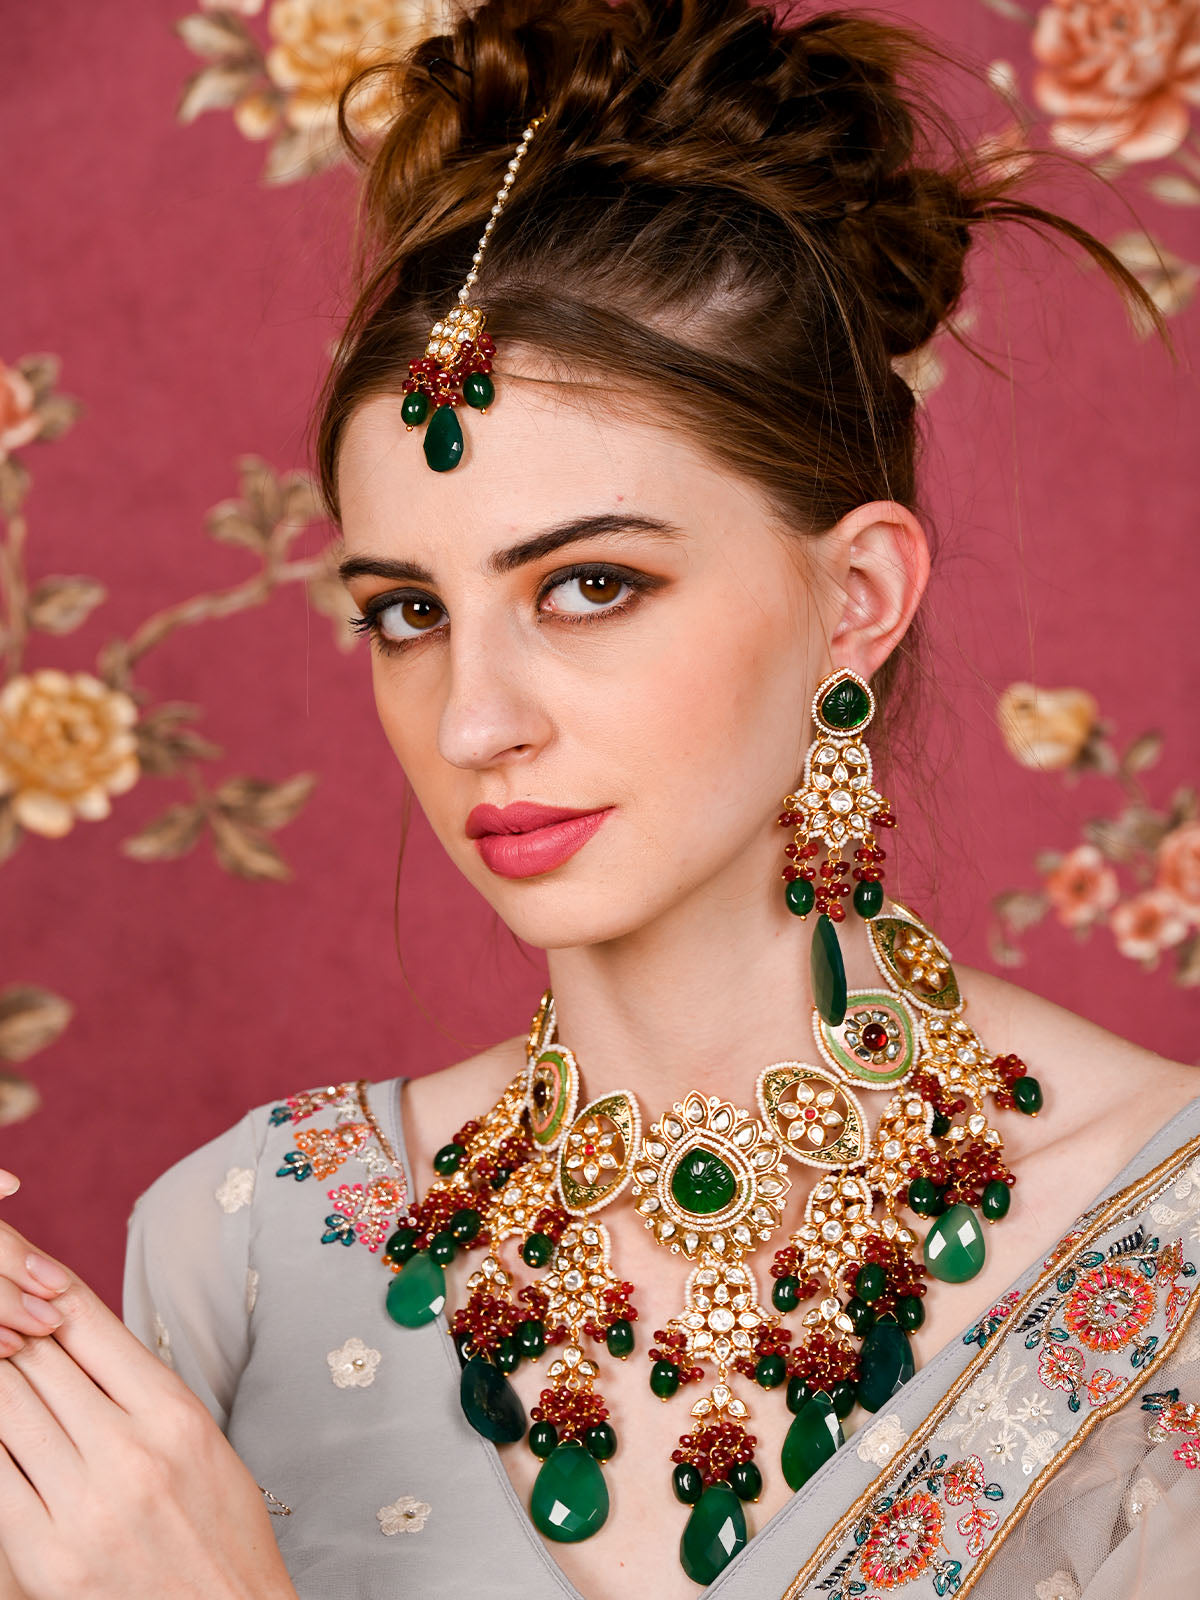 Bridal Choker Necklaces That Will Steal The Show This Wedding Season